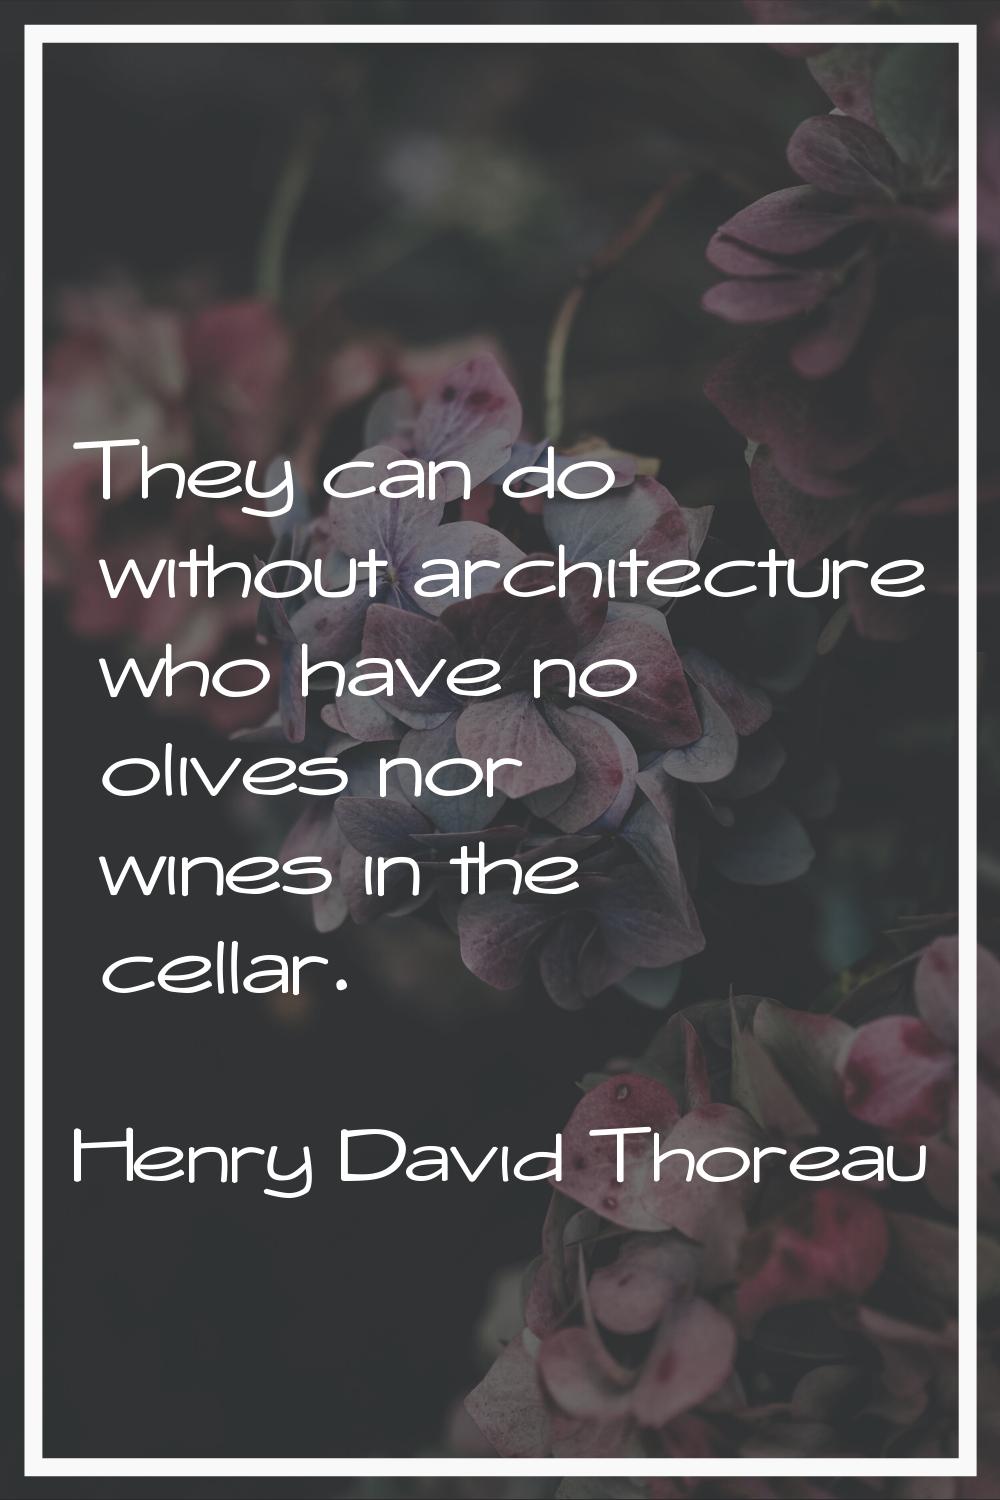 They can do without architecture who have no olives nor wines in the cellar.